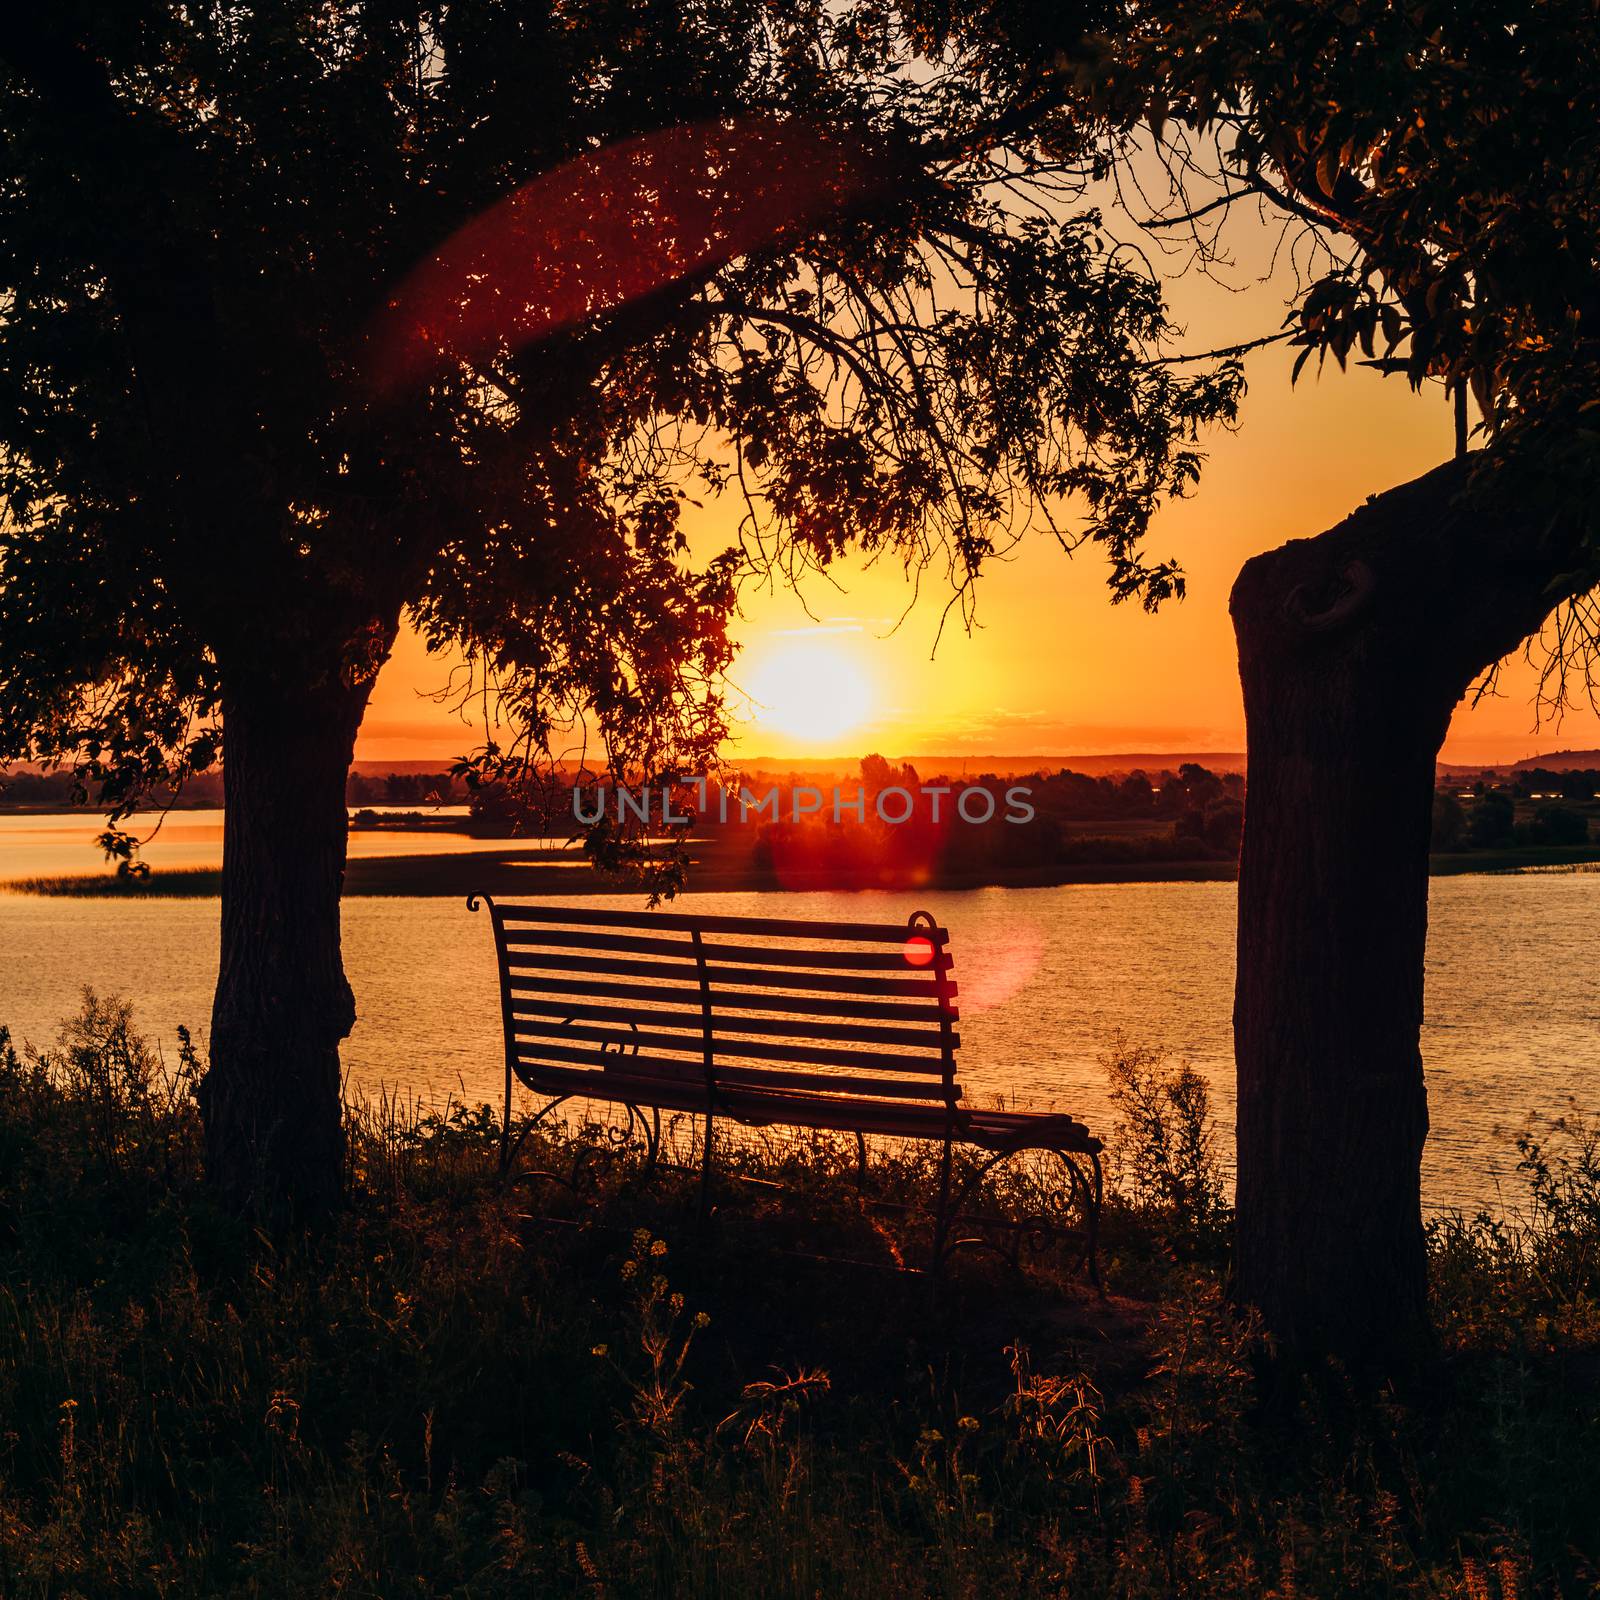 Bench by the River Between Two Trees. Summer Golden Sunset.